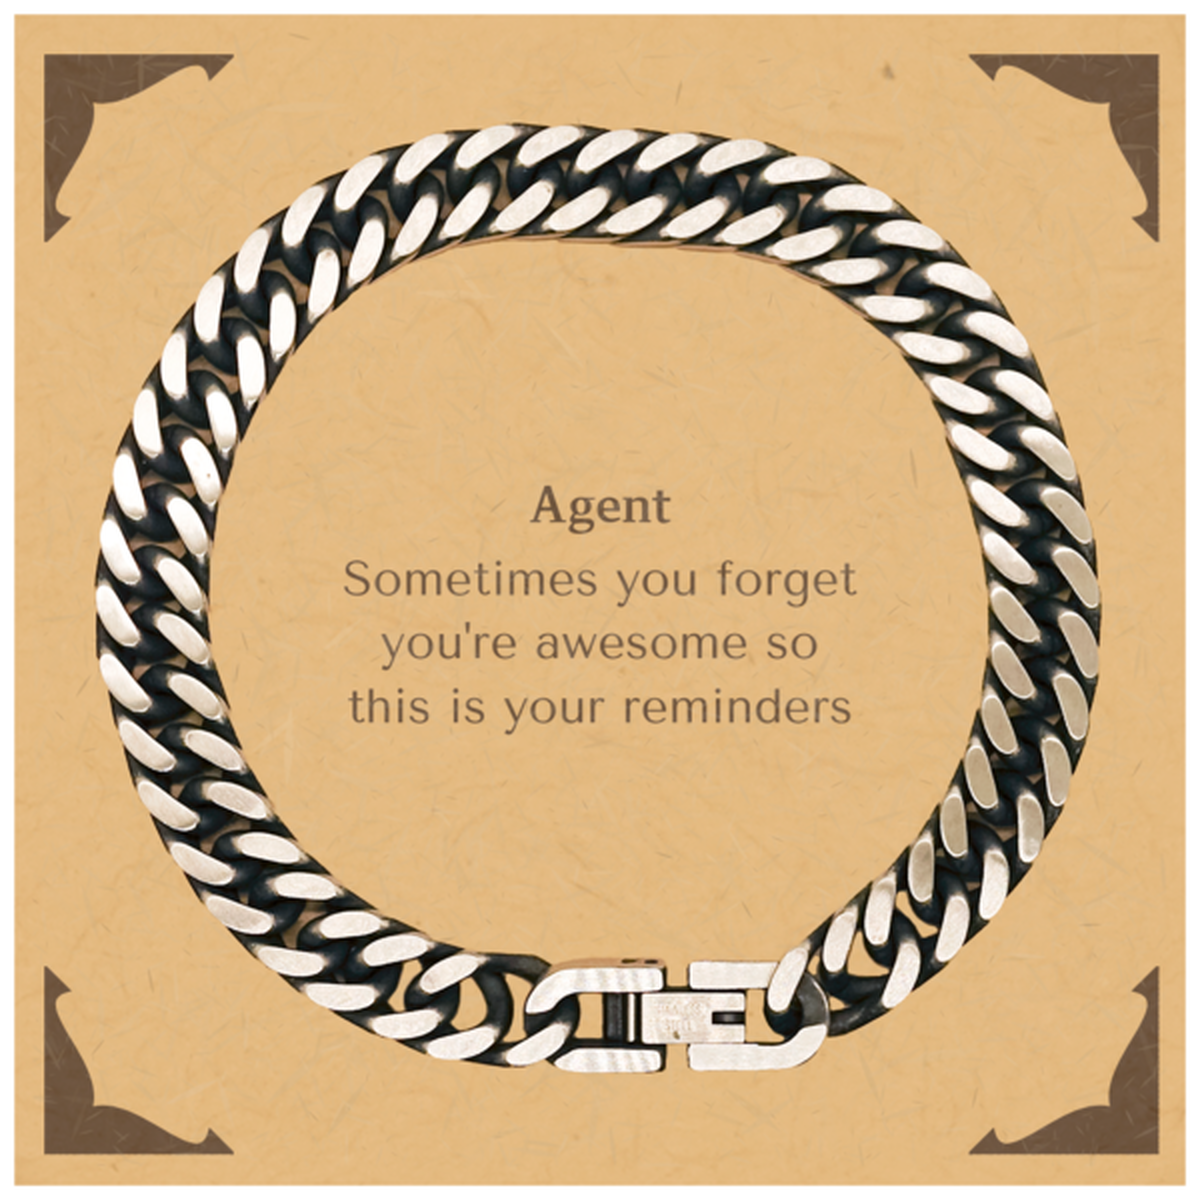 Sentimental Agent Cuban Link Chain Bracelet, Agent Sometimes you forget you're awesome so this is your reminders, Graduation Christmas Birthday Gifts for Agent, Men, Women, Coworkers